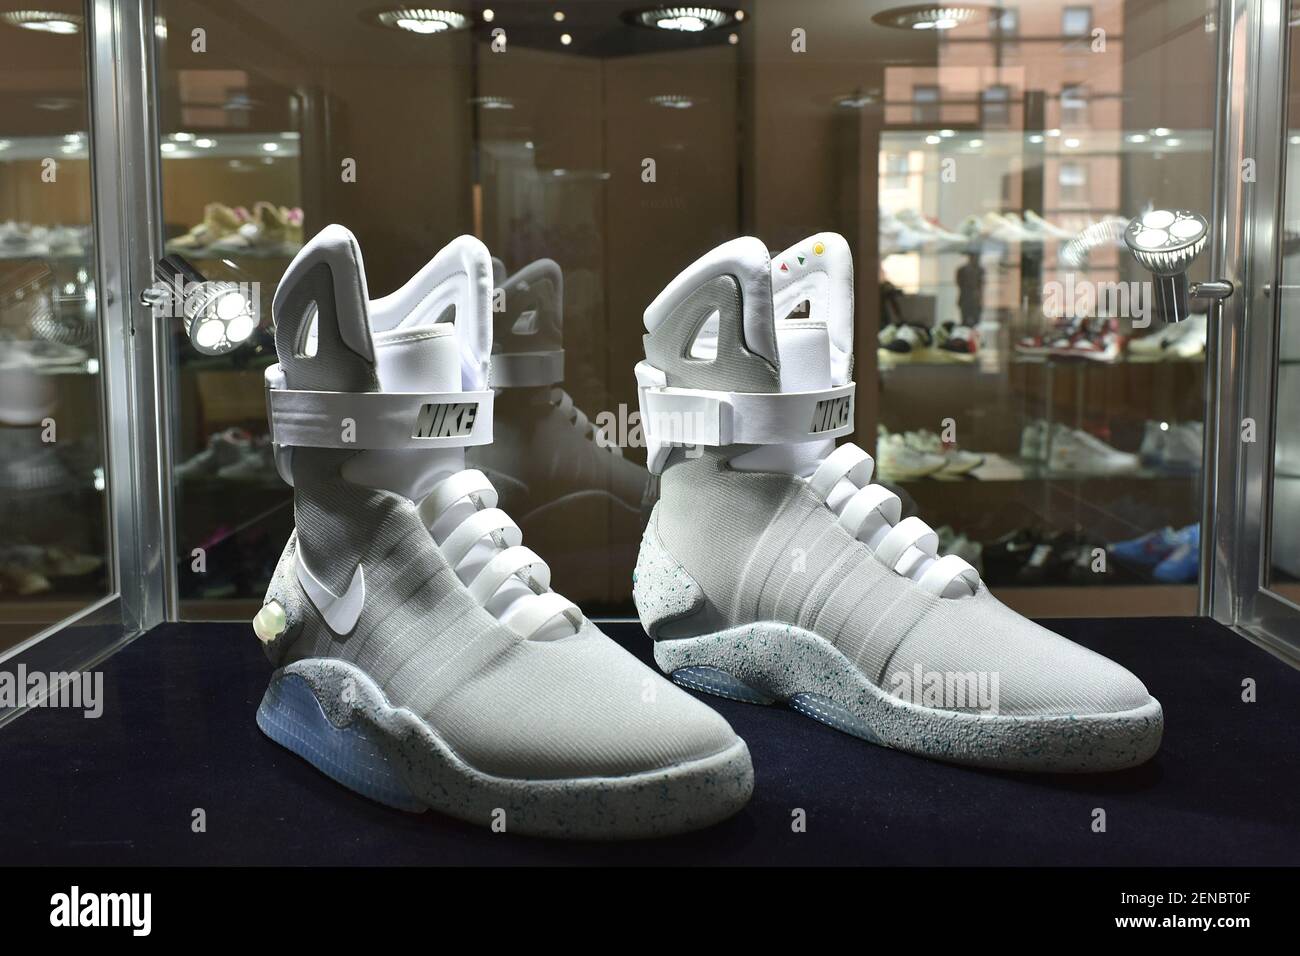 A of 2016 self-lacing to the Future II” Mags at Sotheby's & Stadium Goods Ultimate Sneaker collection featuring 100 of the rarest produced, New York, NY, July 22,